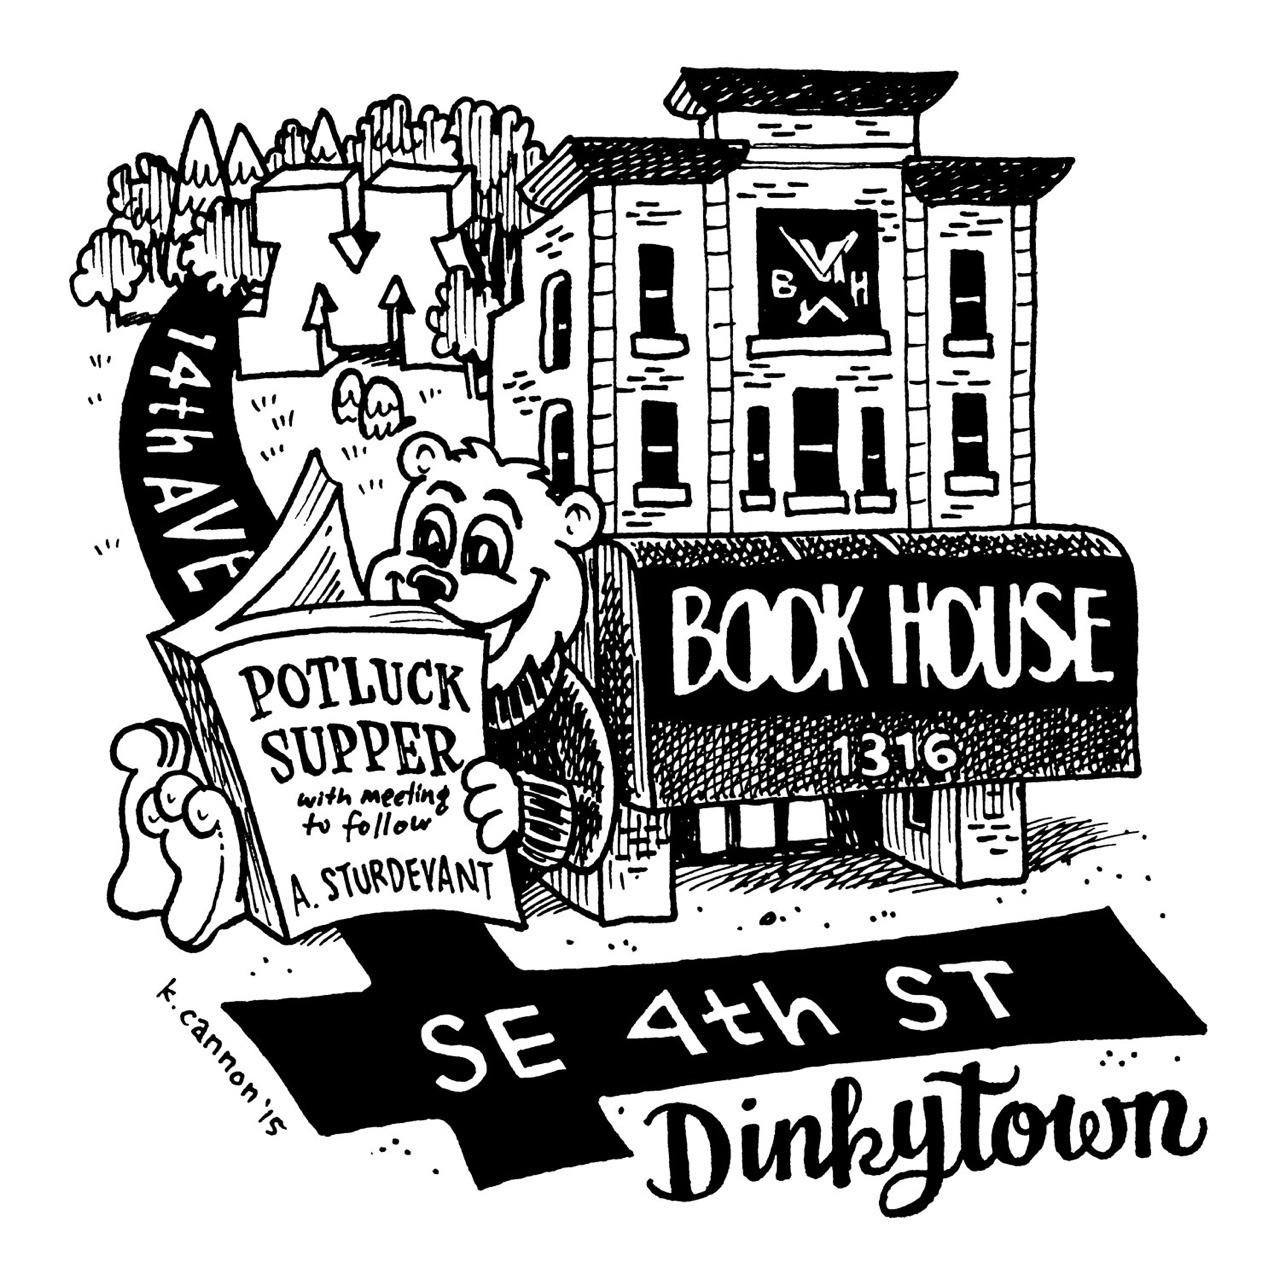 http://stuffaboutminneapolis.tumblr.com/post/131123426039/kevincannonart-inktober-day-13-book-house-in